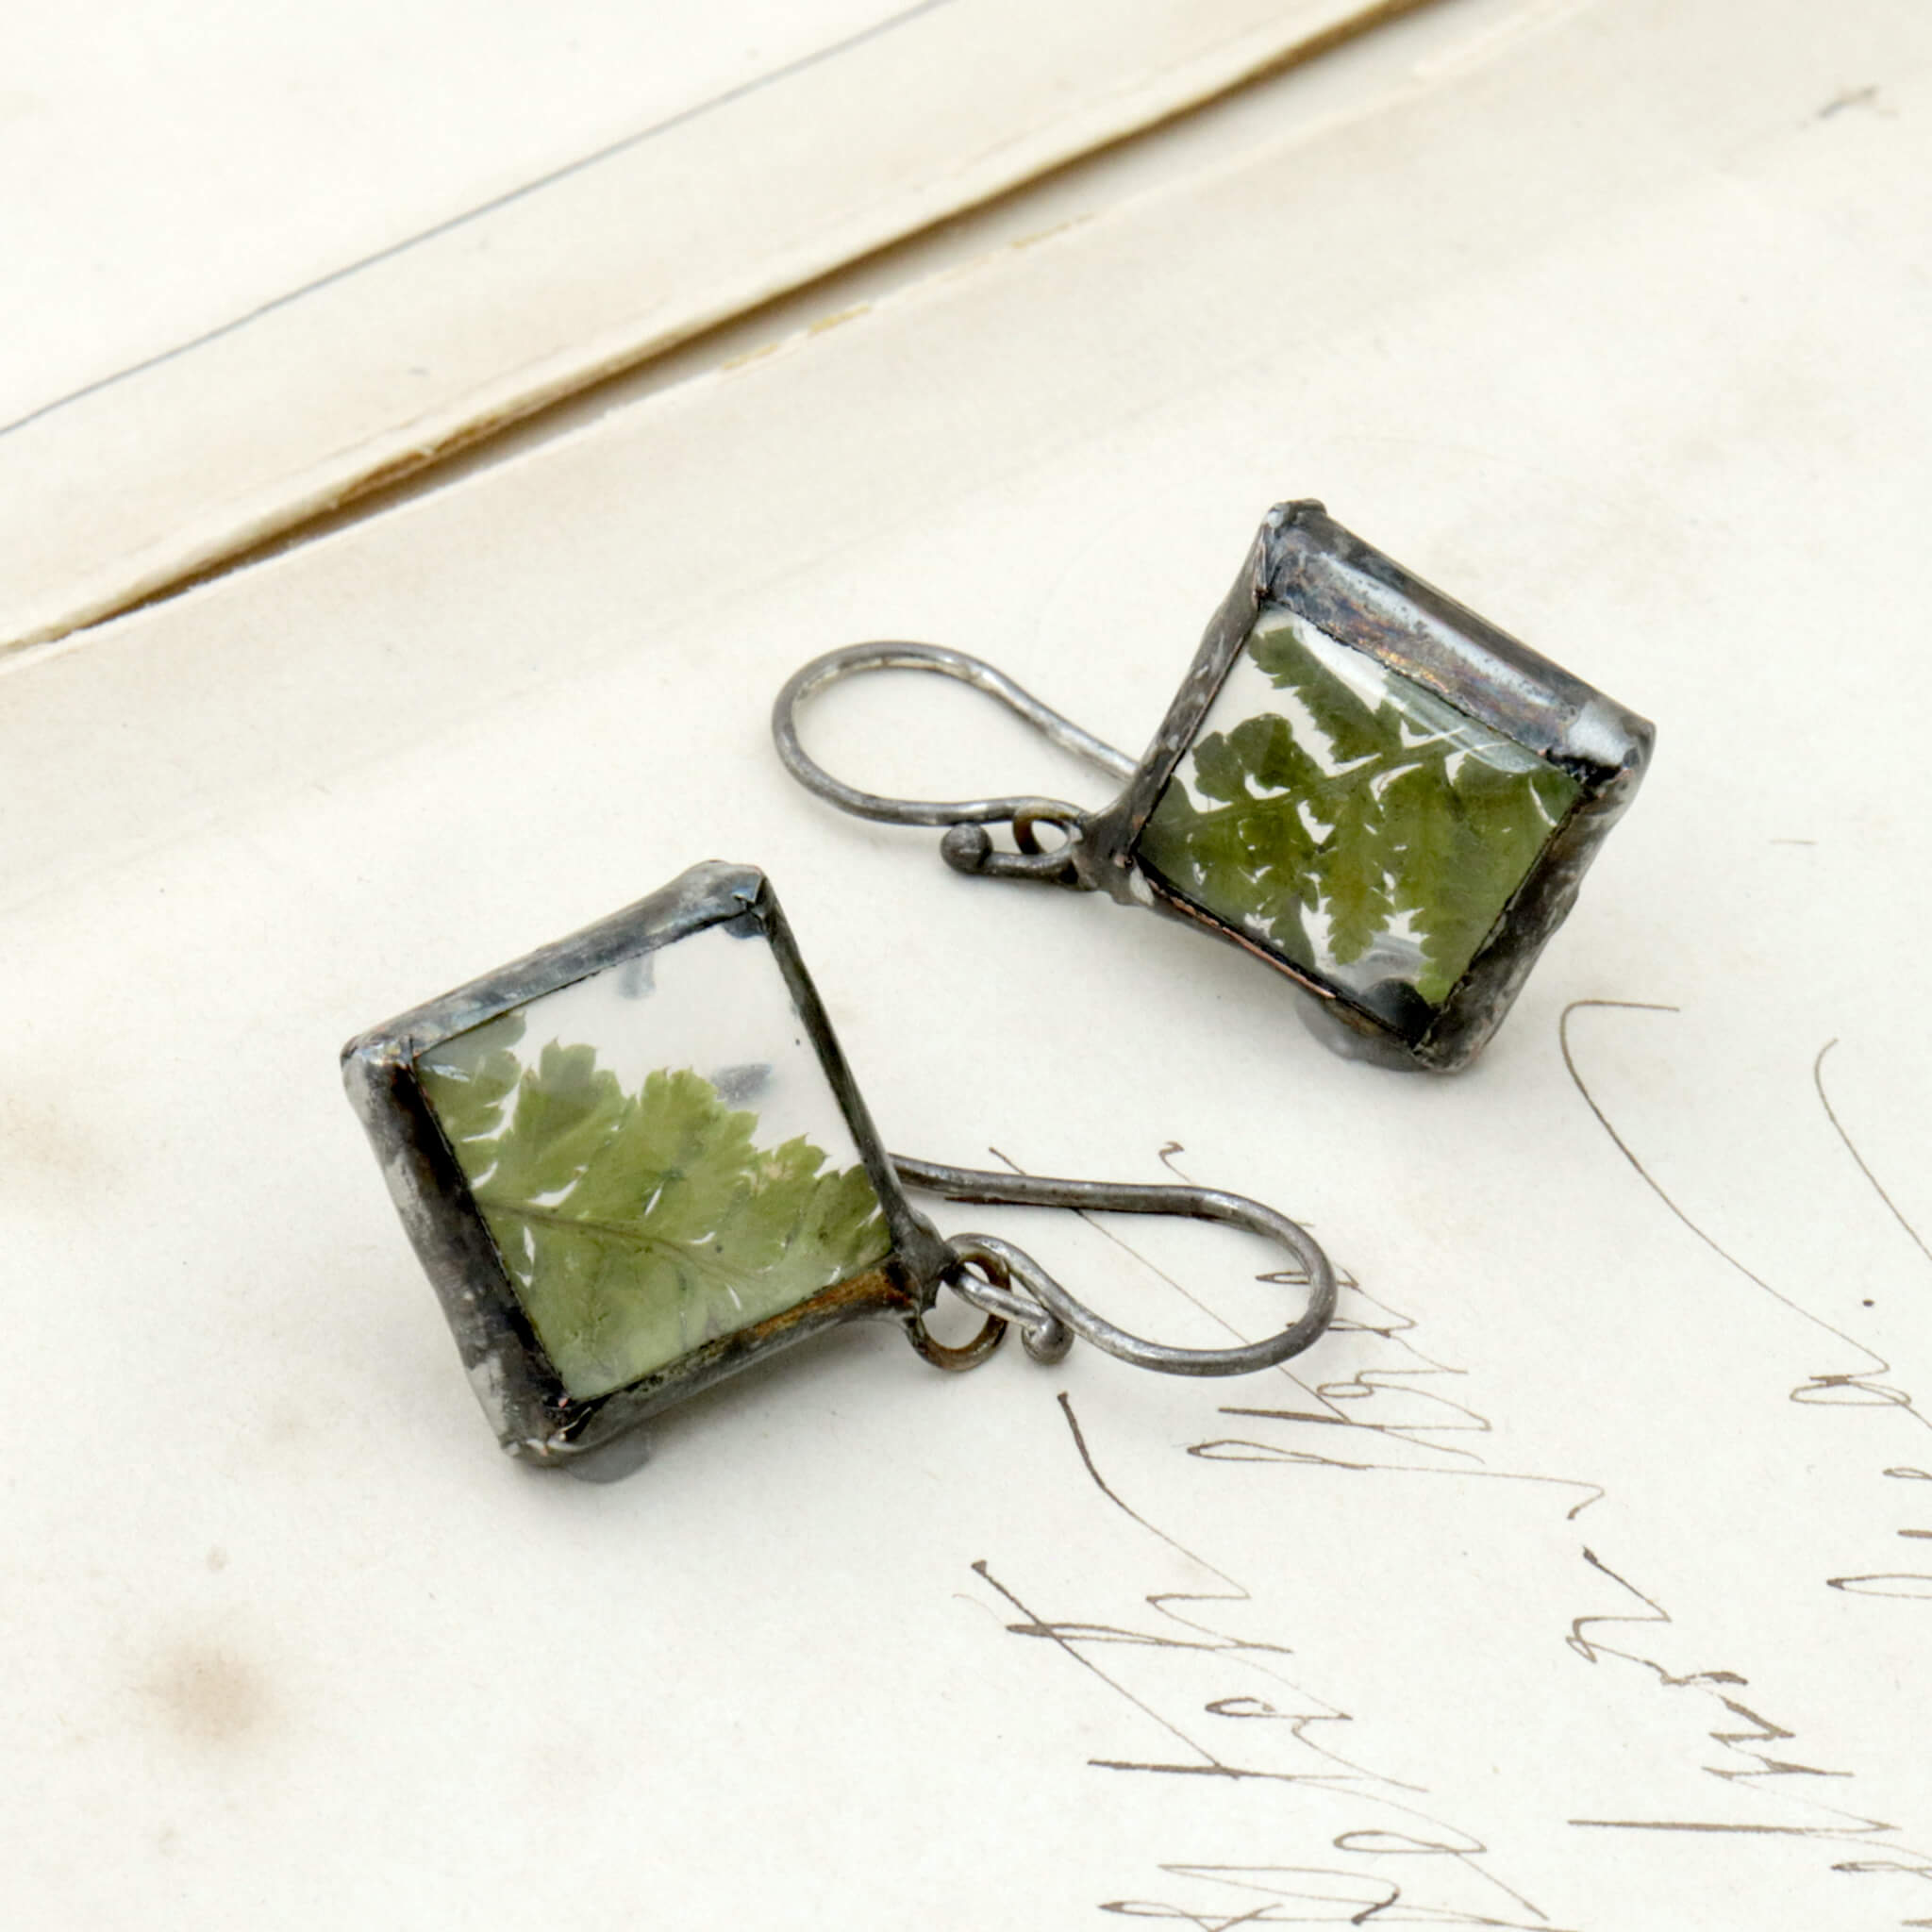 Earrings with real fern lying on an old photo